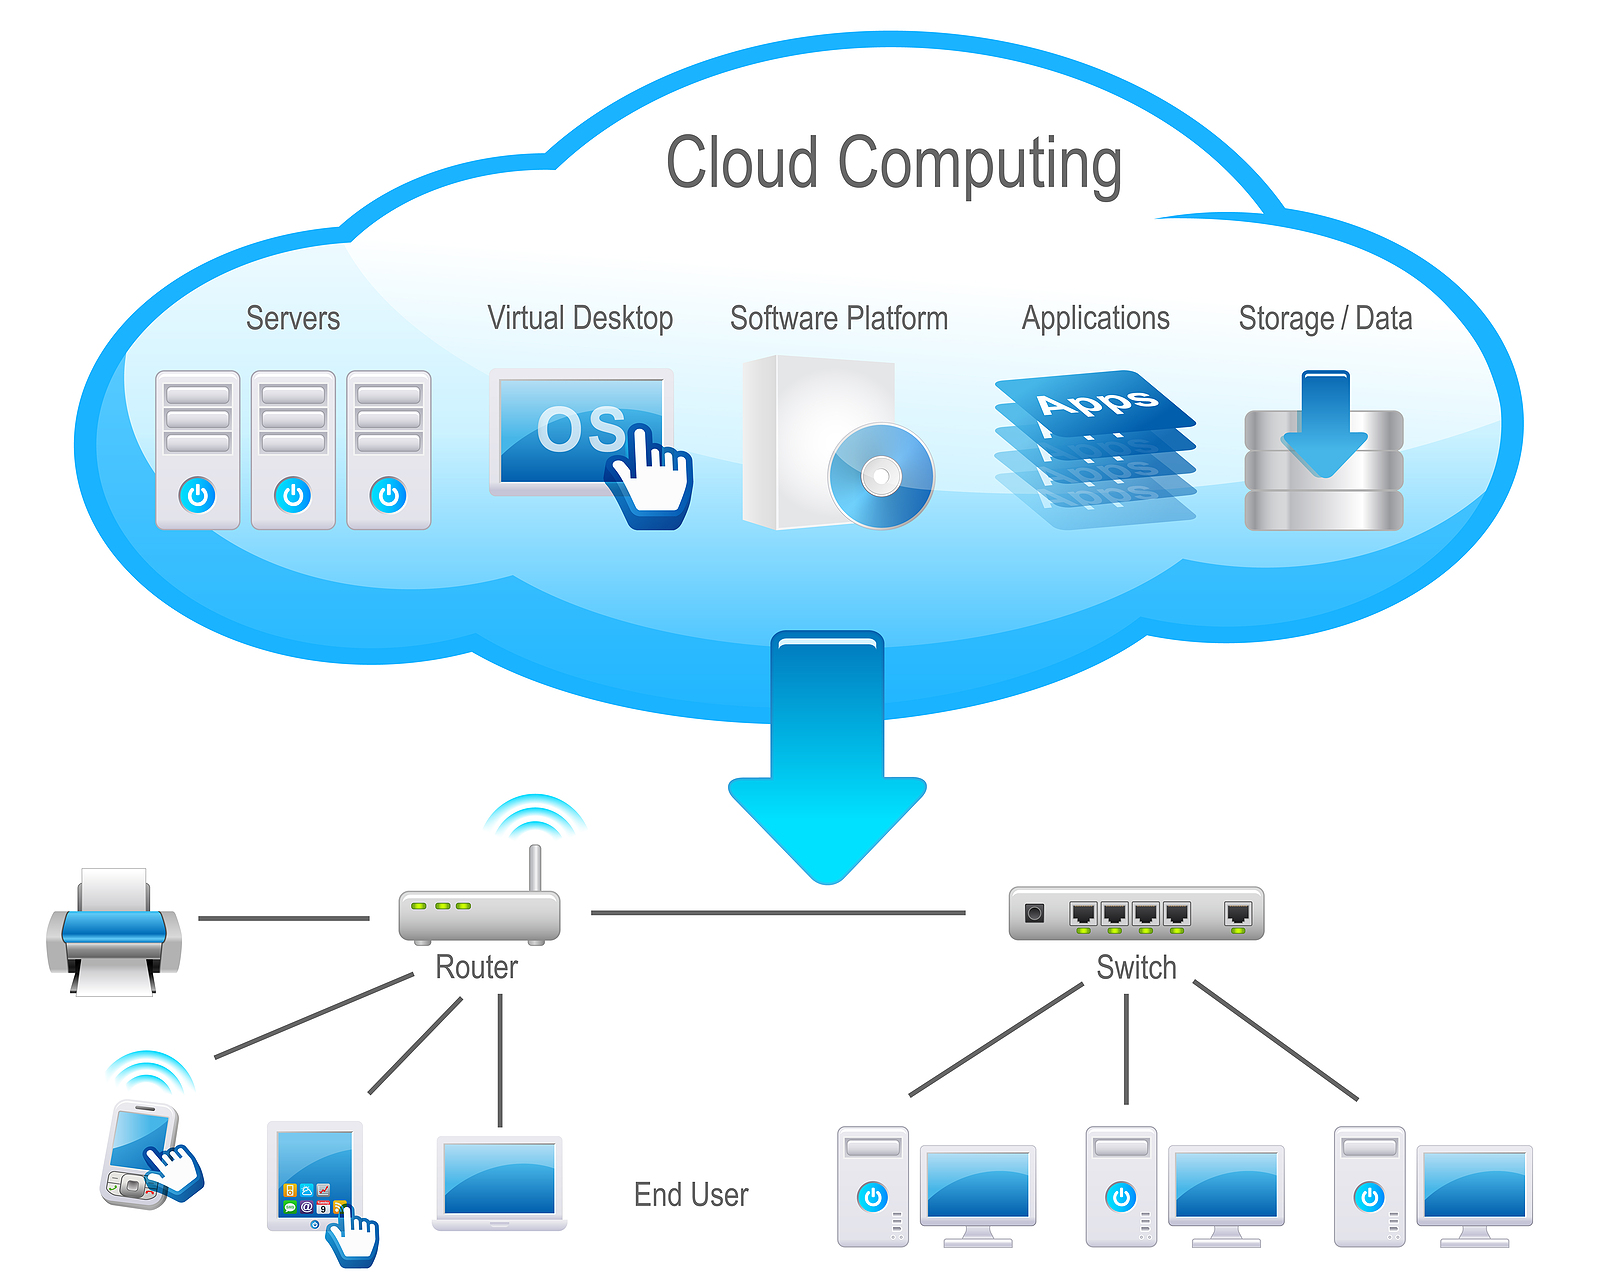 Cloud Computing Challenges and Opportunities